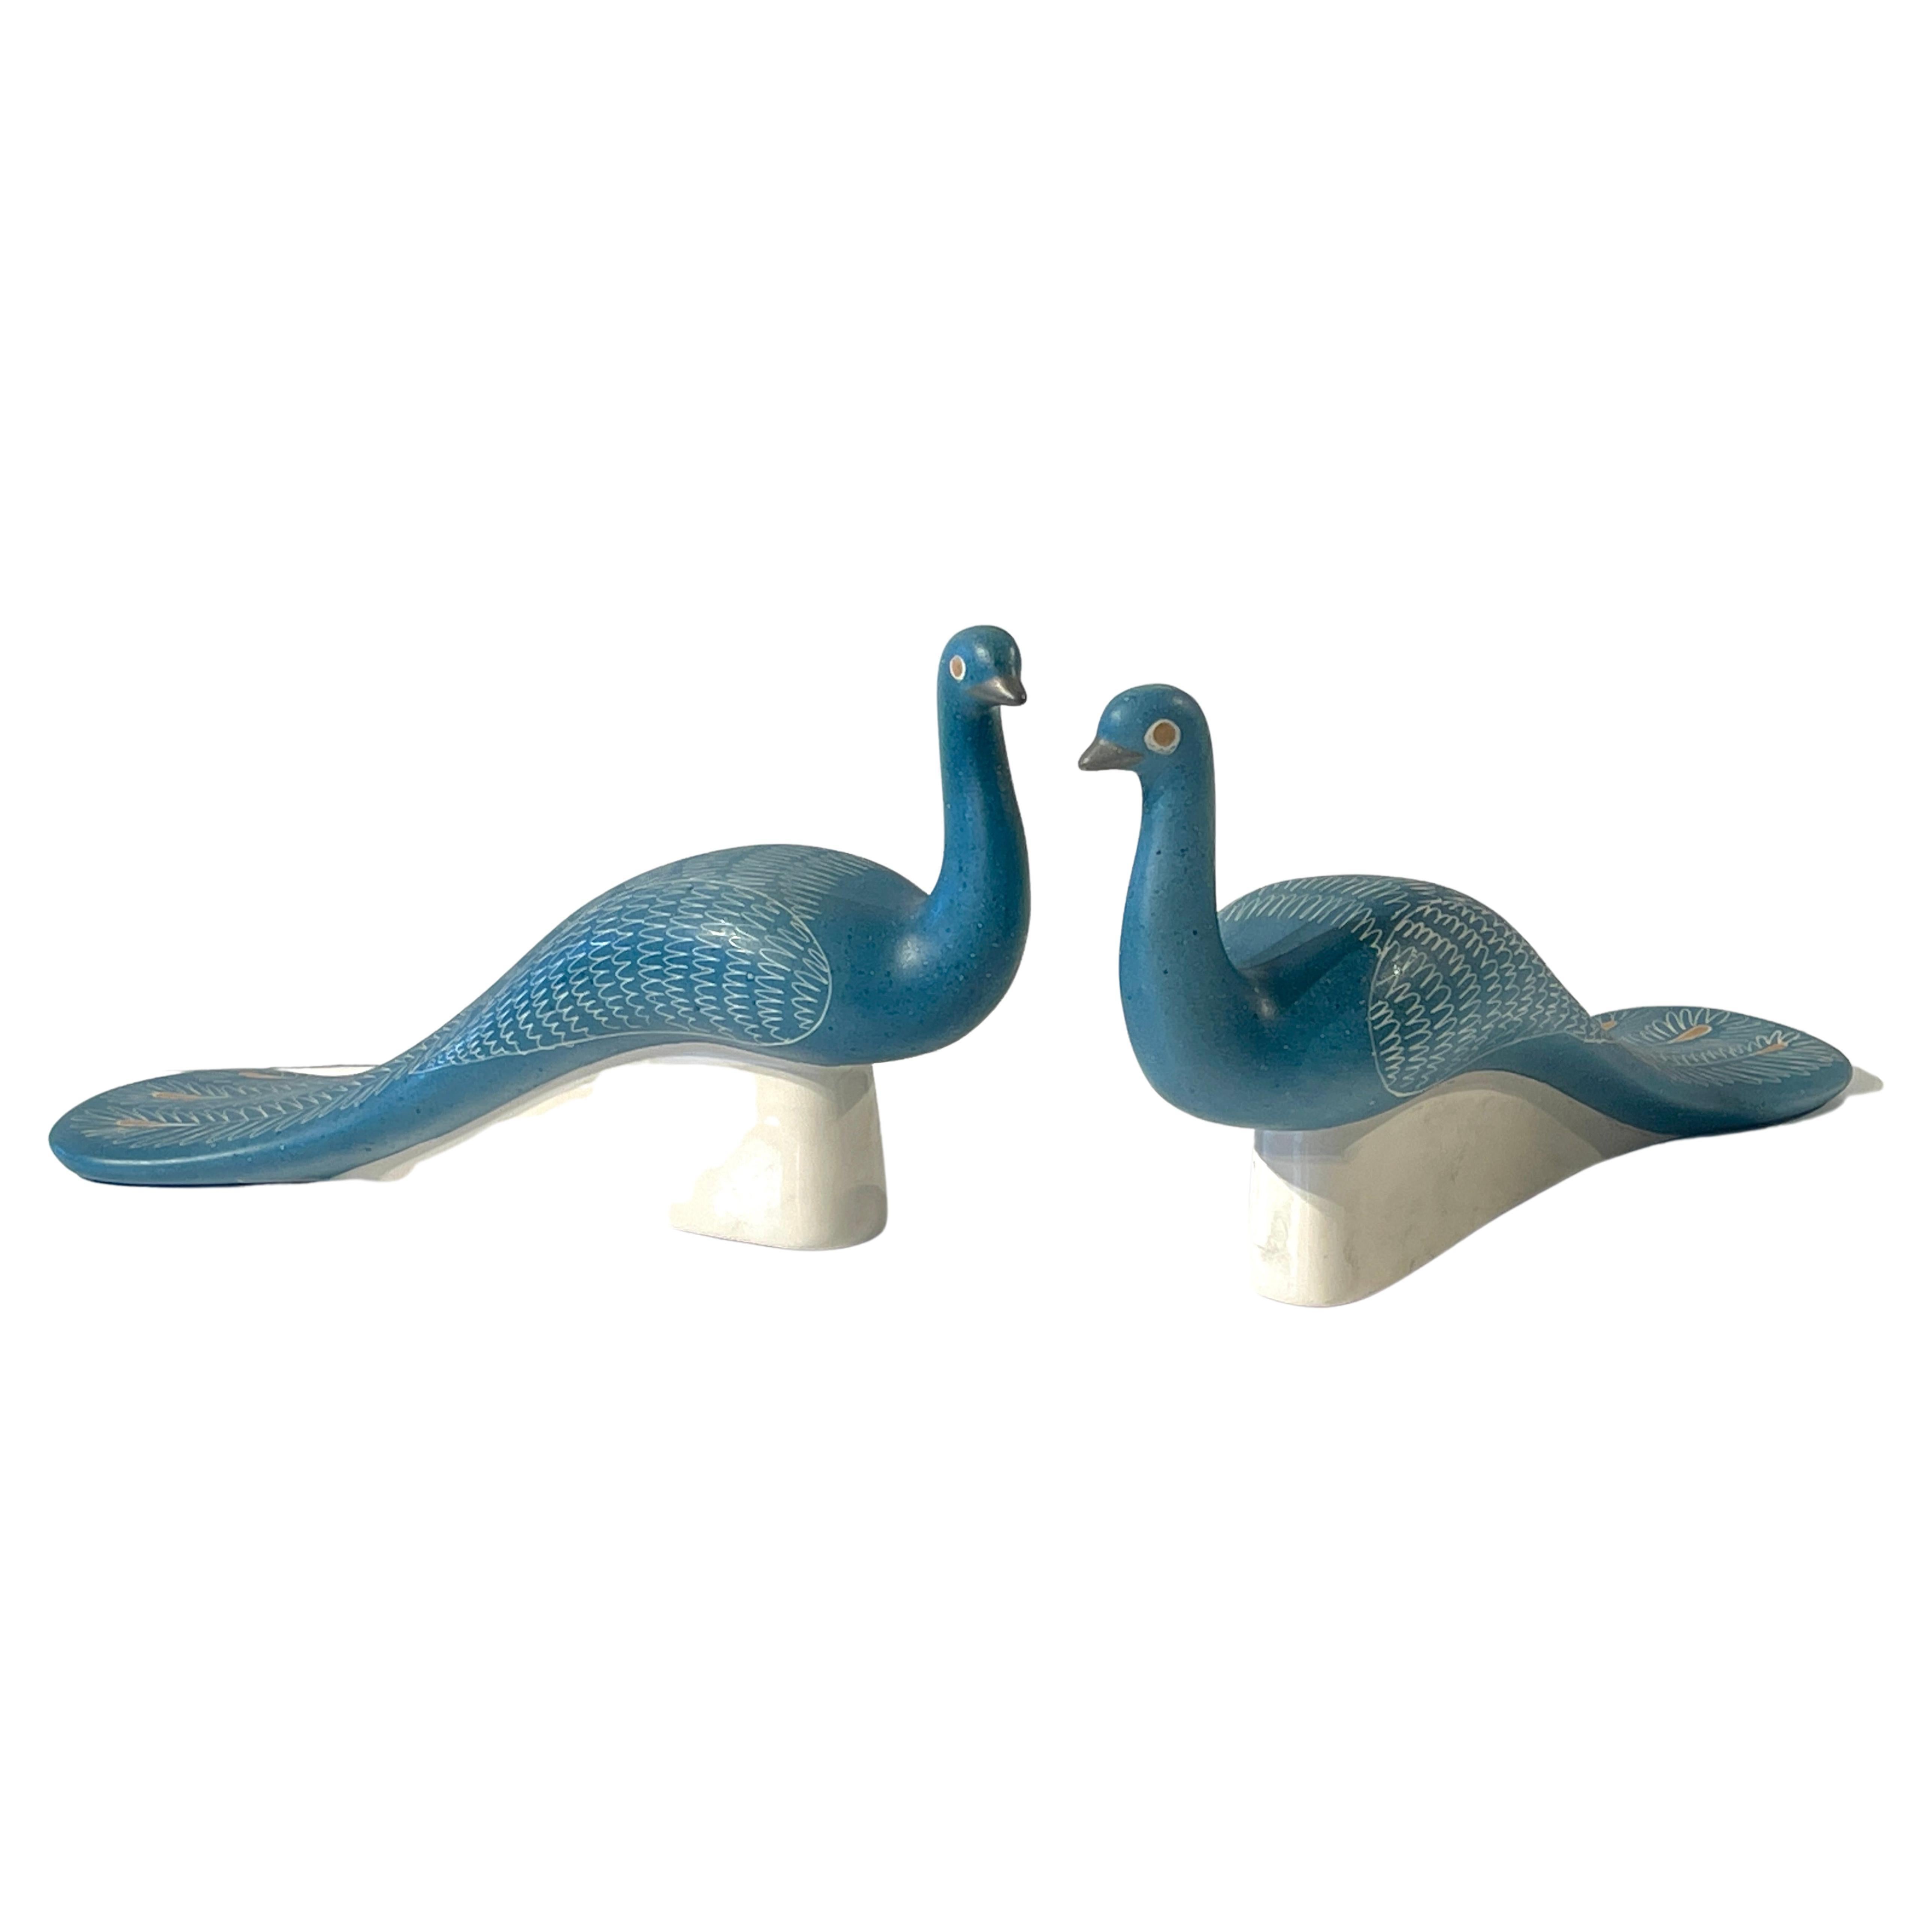 Pair of Blue Peacocks Sculptures, by Waylande Gregory For Sale